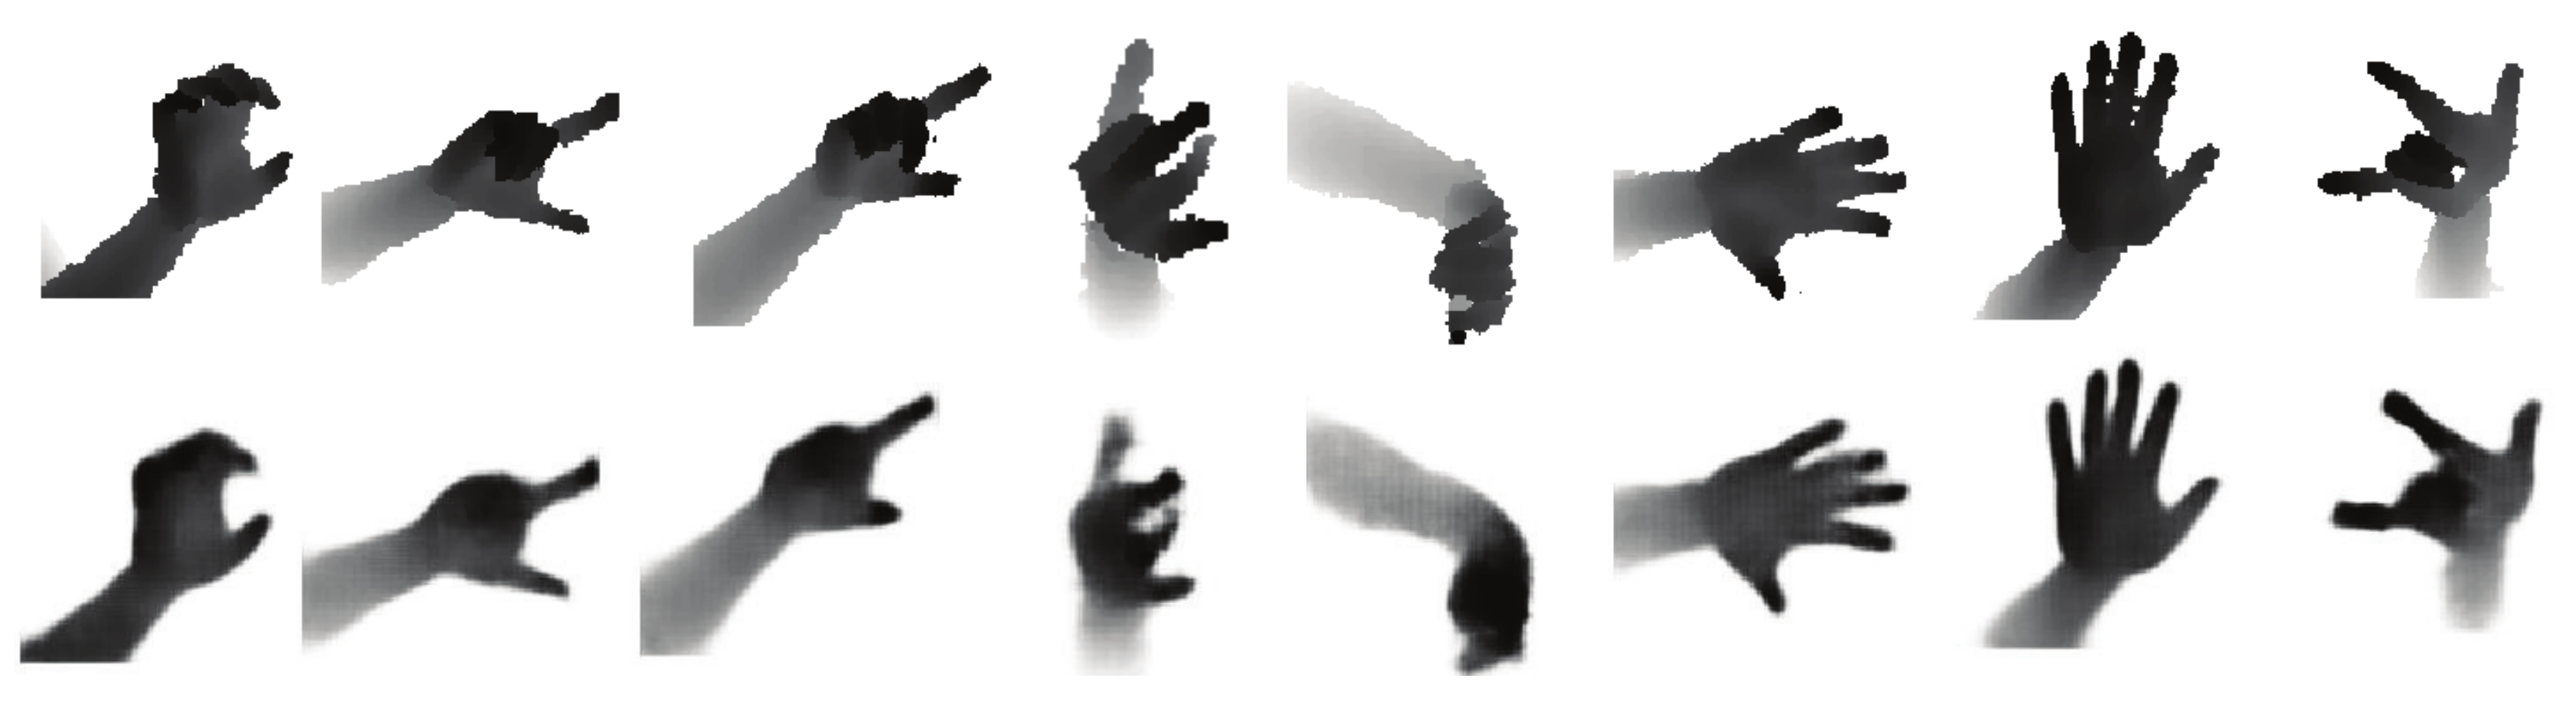 Sensors | Free Full-Text | Synthesizing Depth Hand Images with GANs and  Style Transfer for Hand Pose Estimation